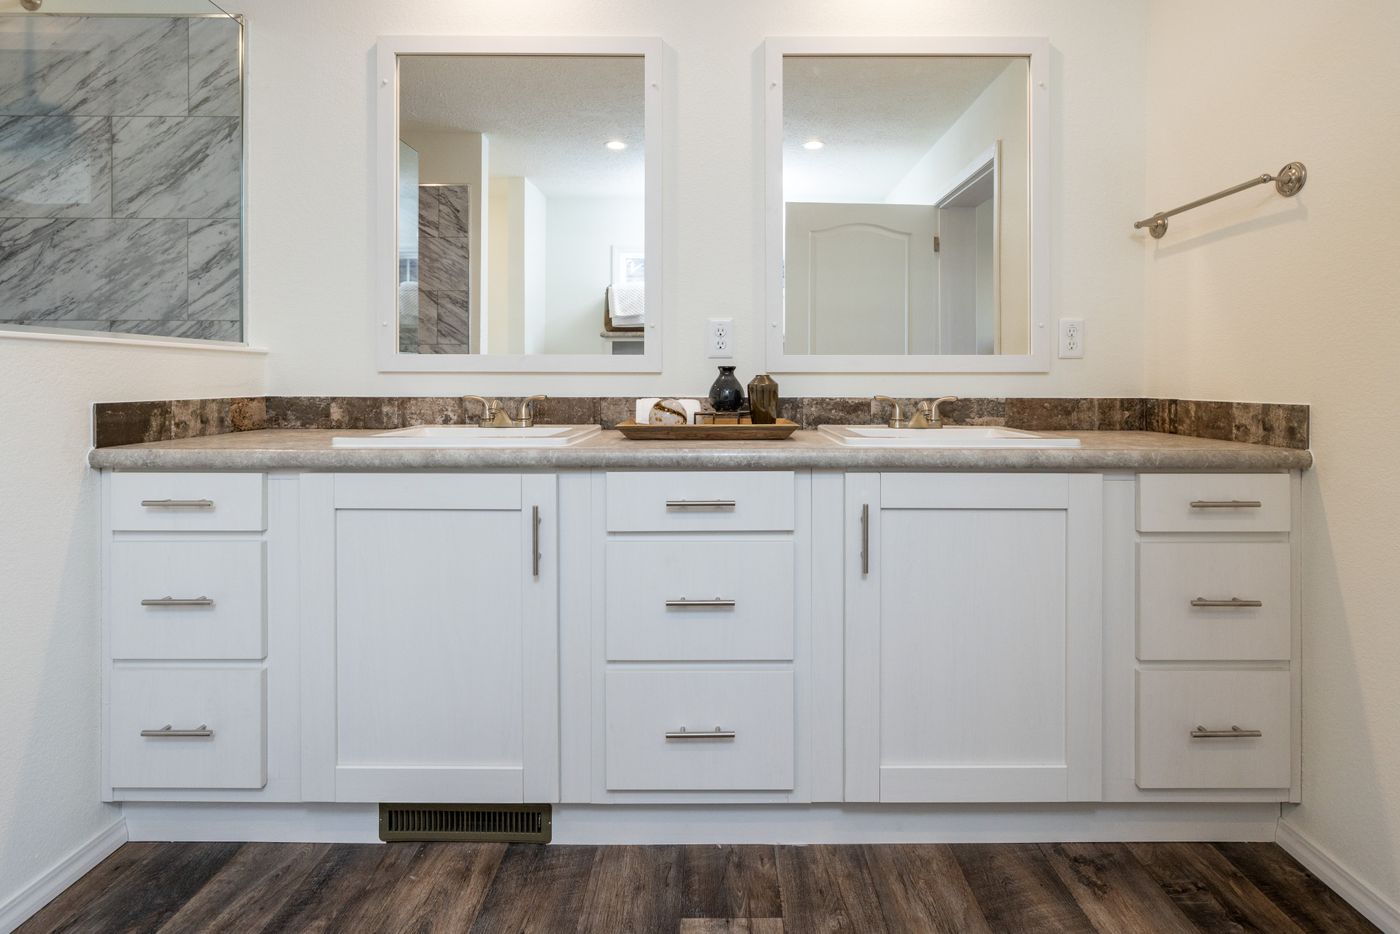 The THE WASHINGTON MOD Primary Bathroom. This Modular Home features 3 bedrooms and 2 baths.